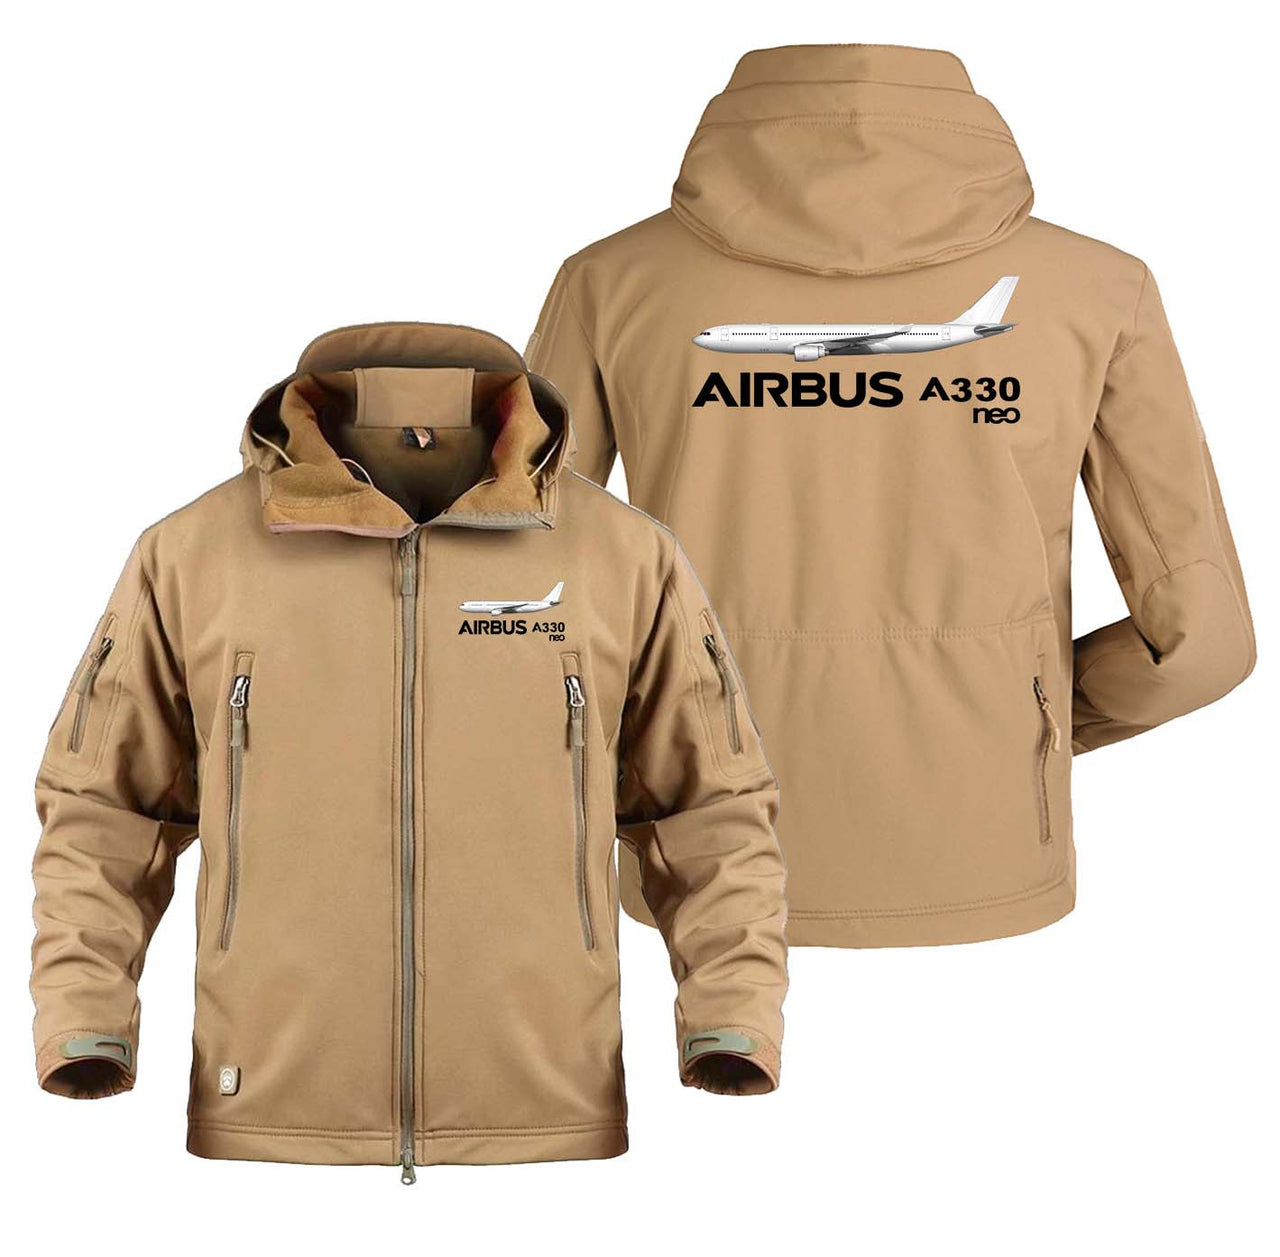 The Airbus A330neo Designed Military Jackets (Customizable)